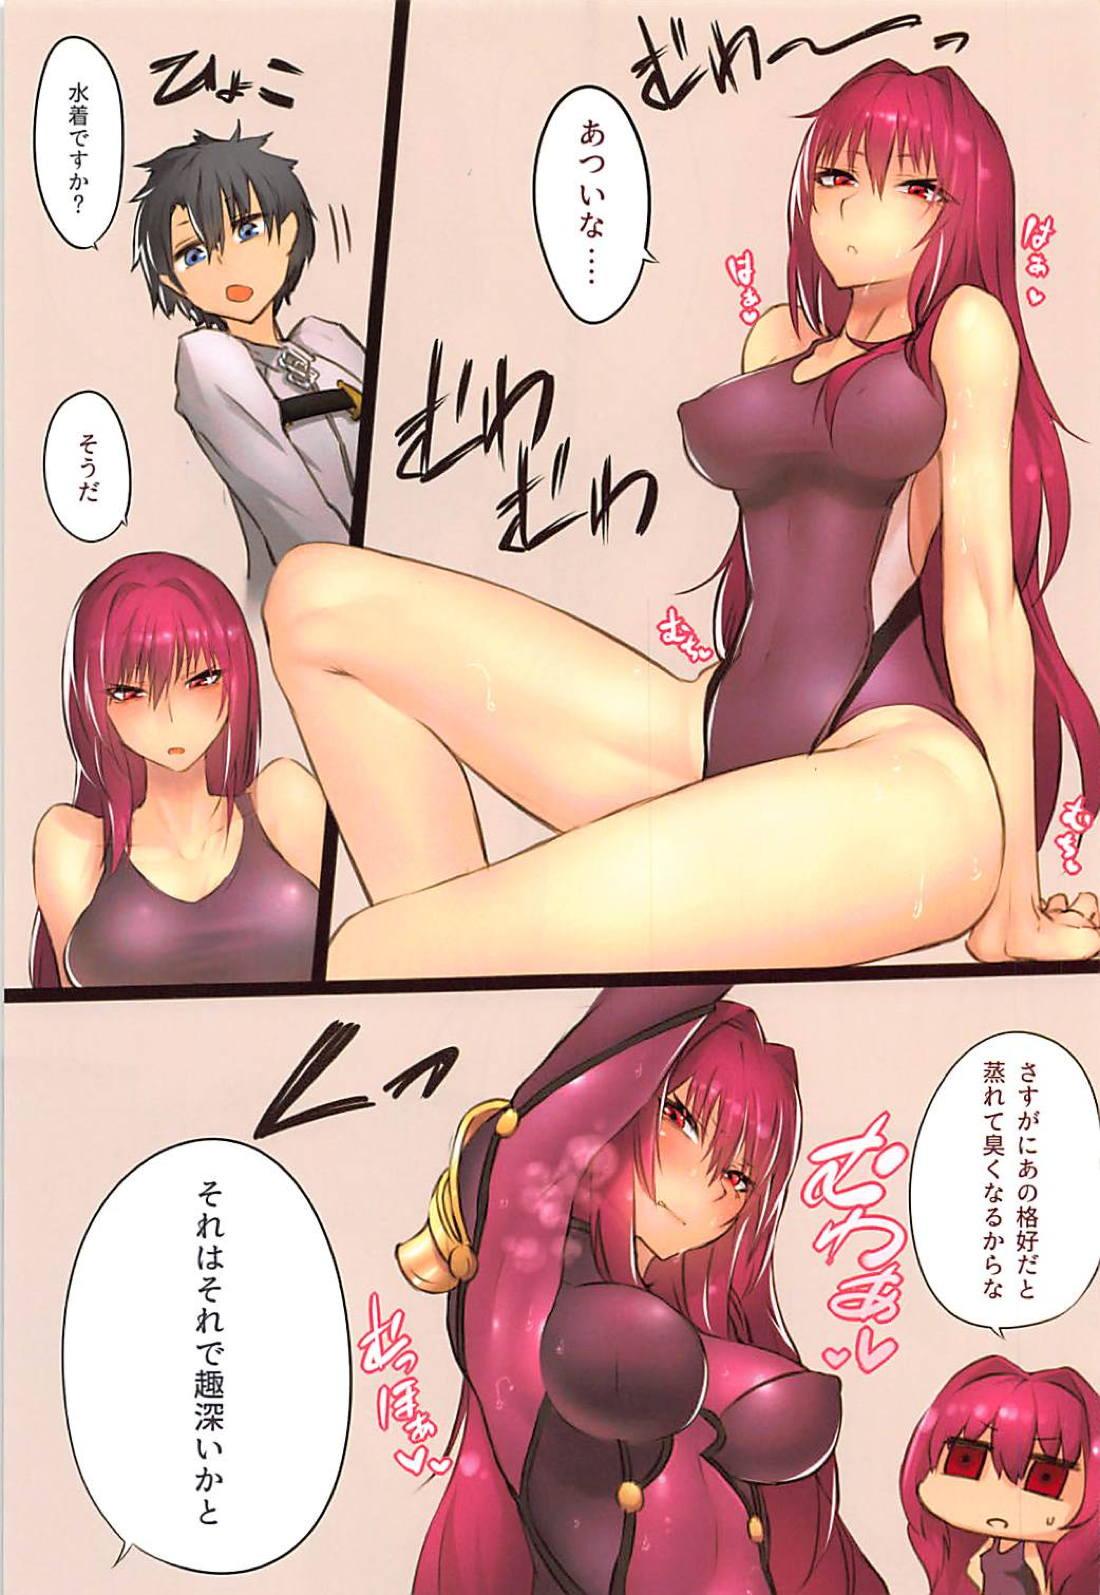 Old And Young GAMU-SYARA Collection 2 - Fate grand order Wanking - Page 2